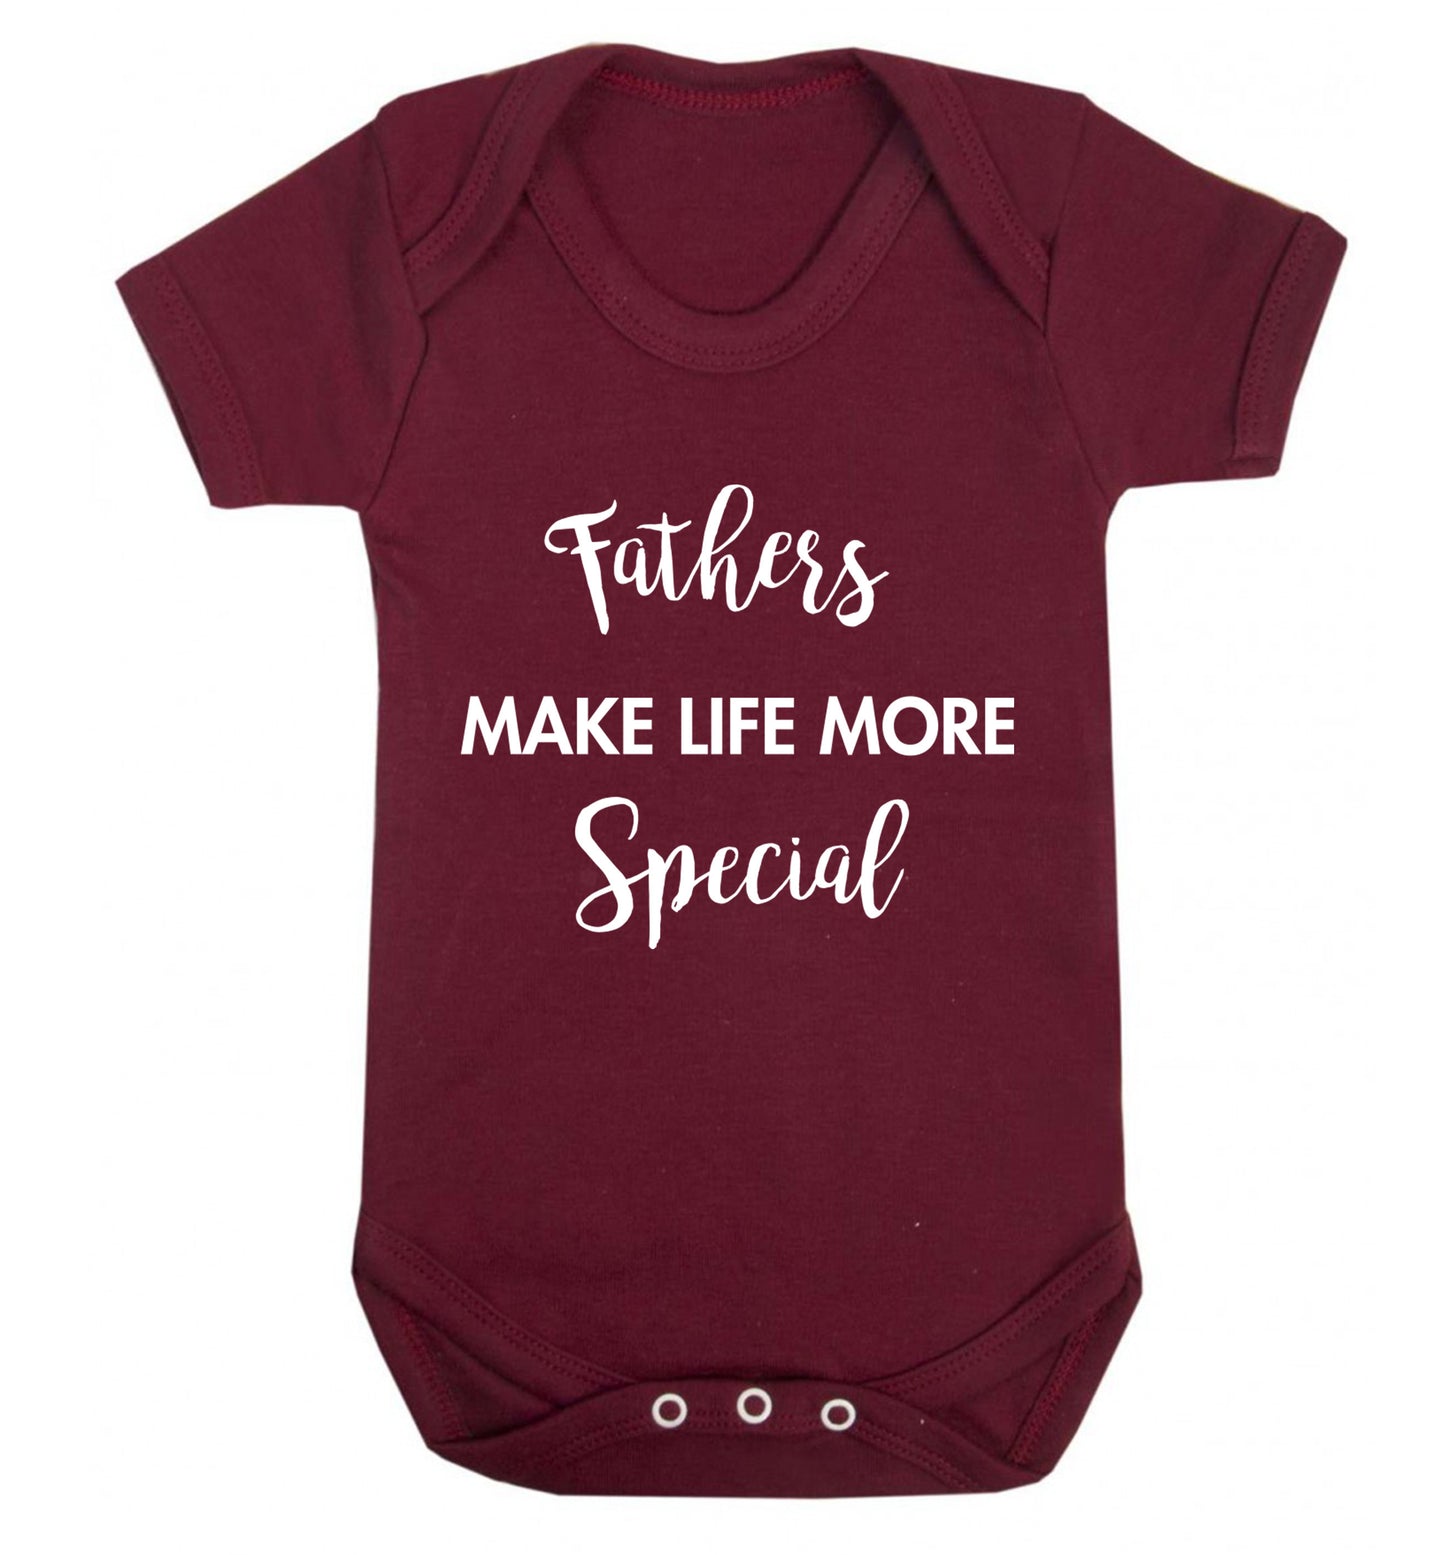 Fathers make life more special Baby Vest maroon 18-24 months